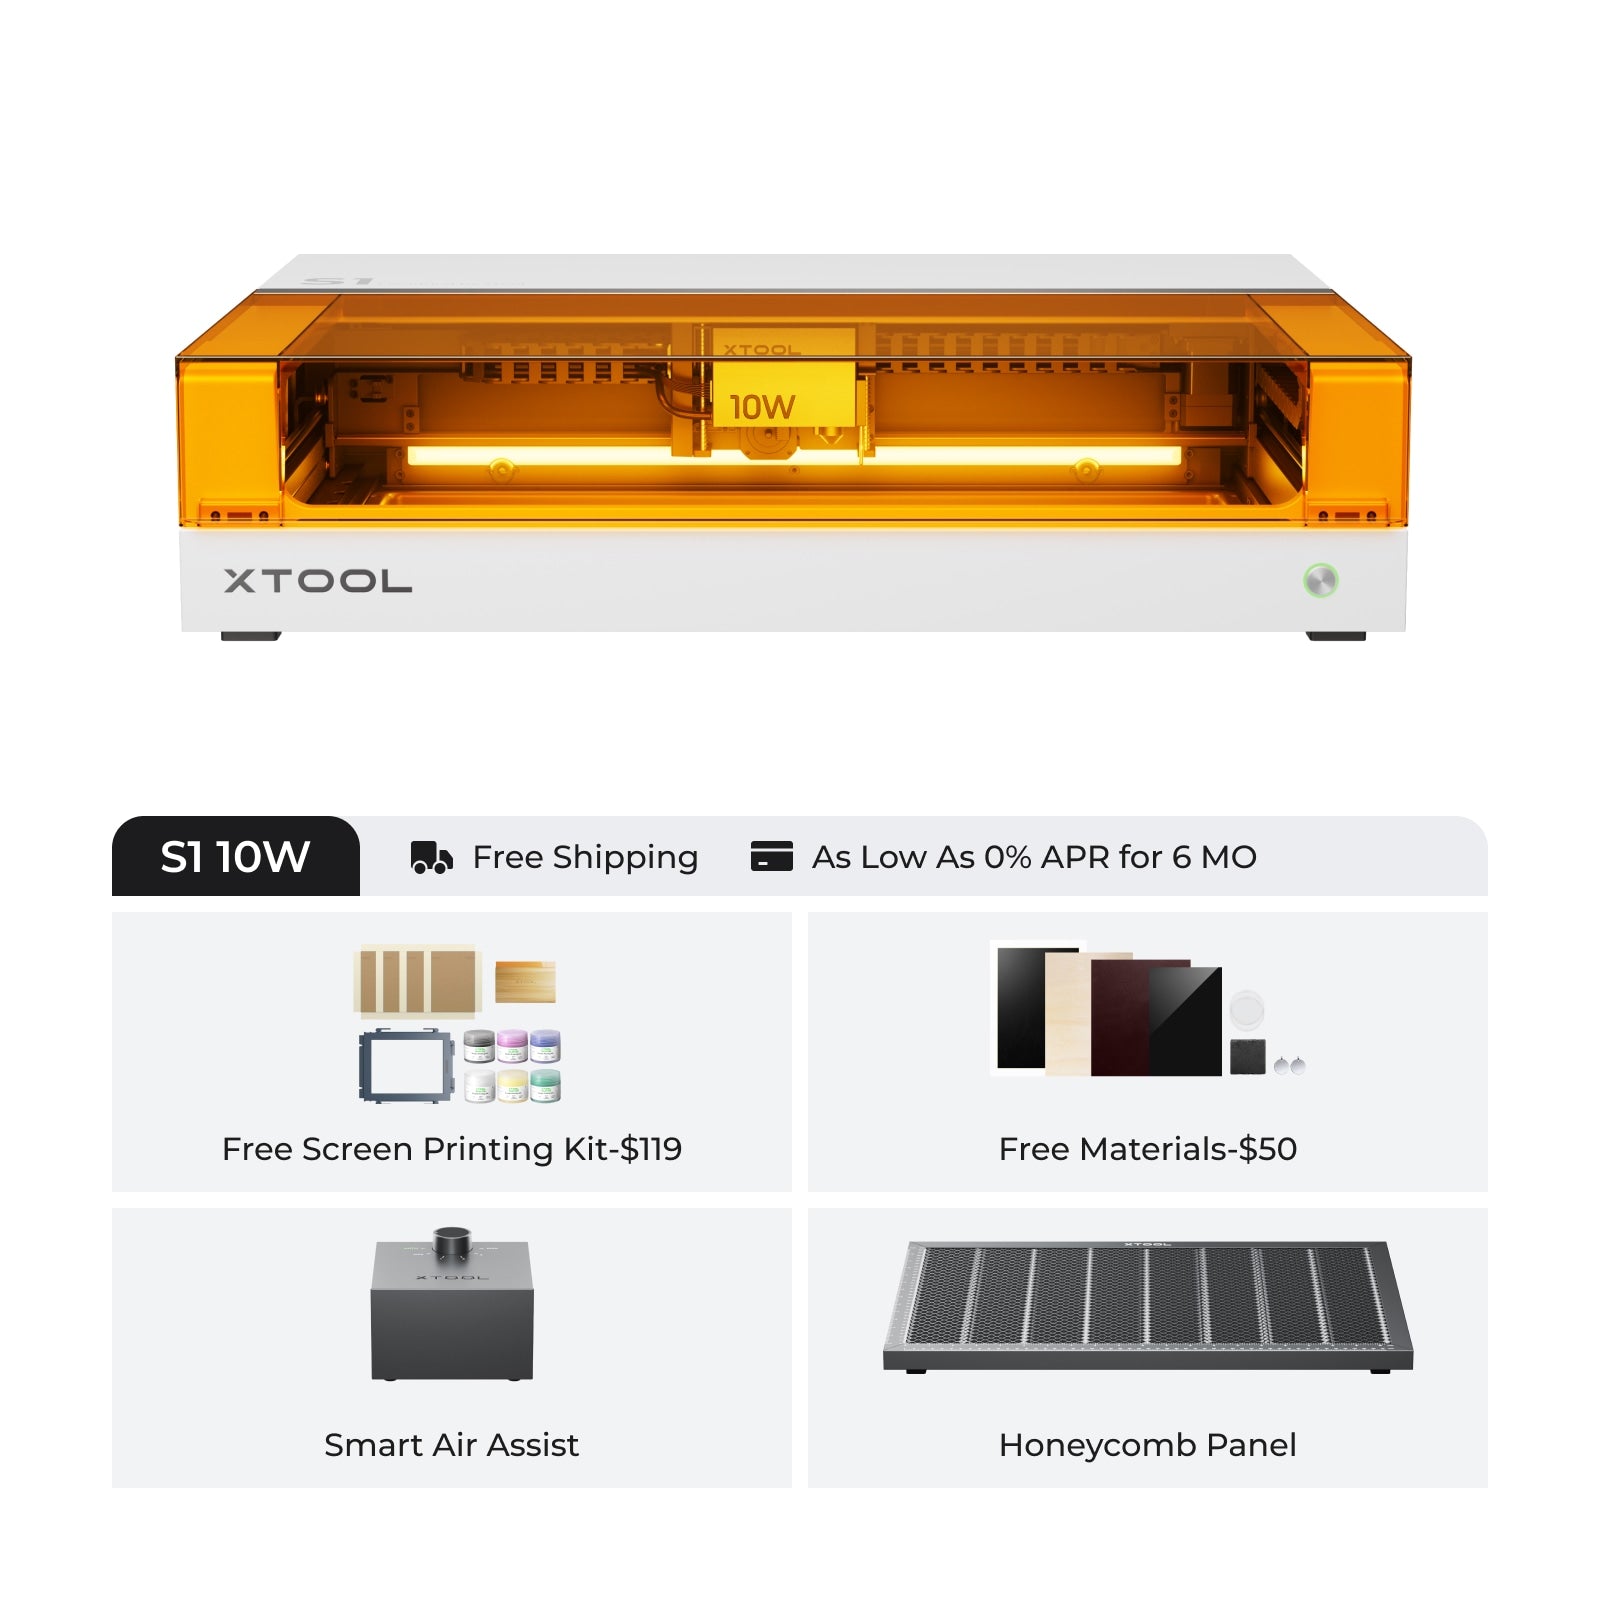 xTool S1 Enclosed Diode Laser Cutter